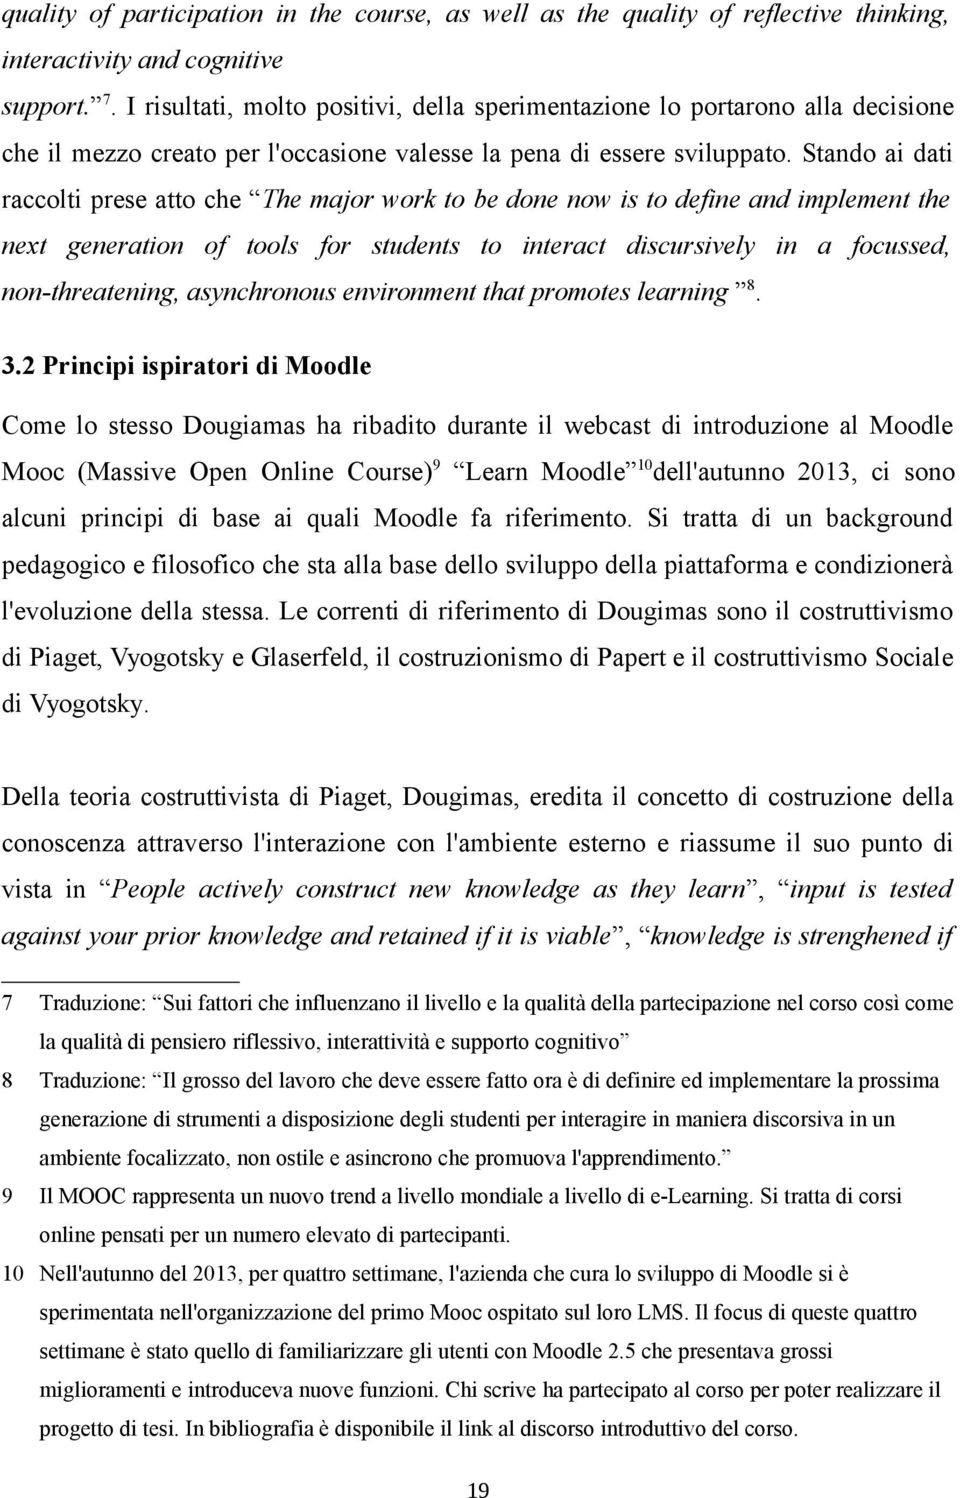 Stando ai dati raccolti prese atto che The major work to be done now is to define and implement the next generation of tools for students to interact discursively in a focussed, non-threatening,